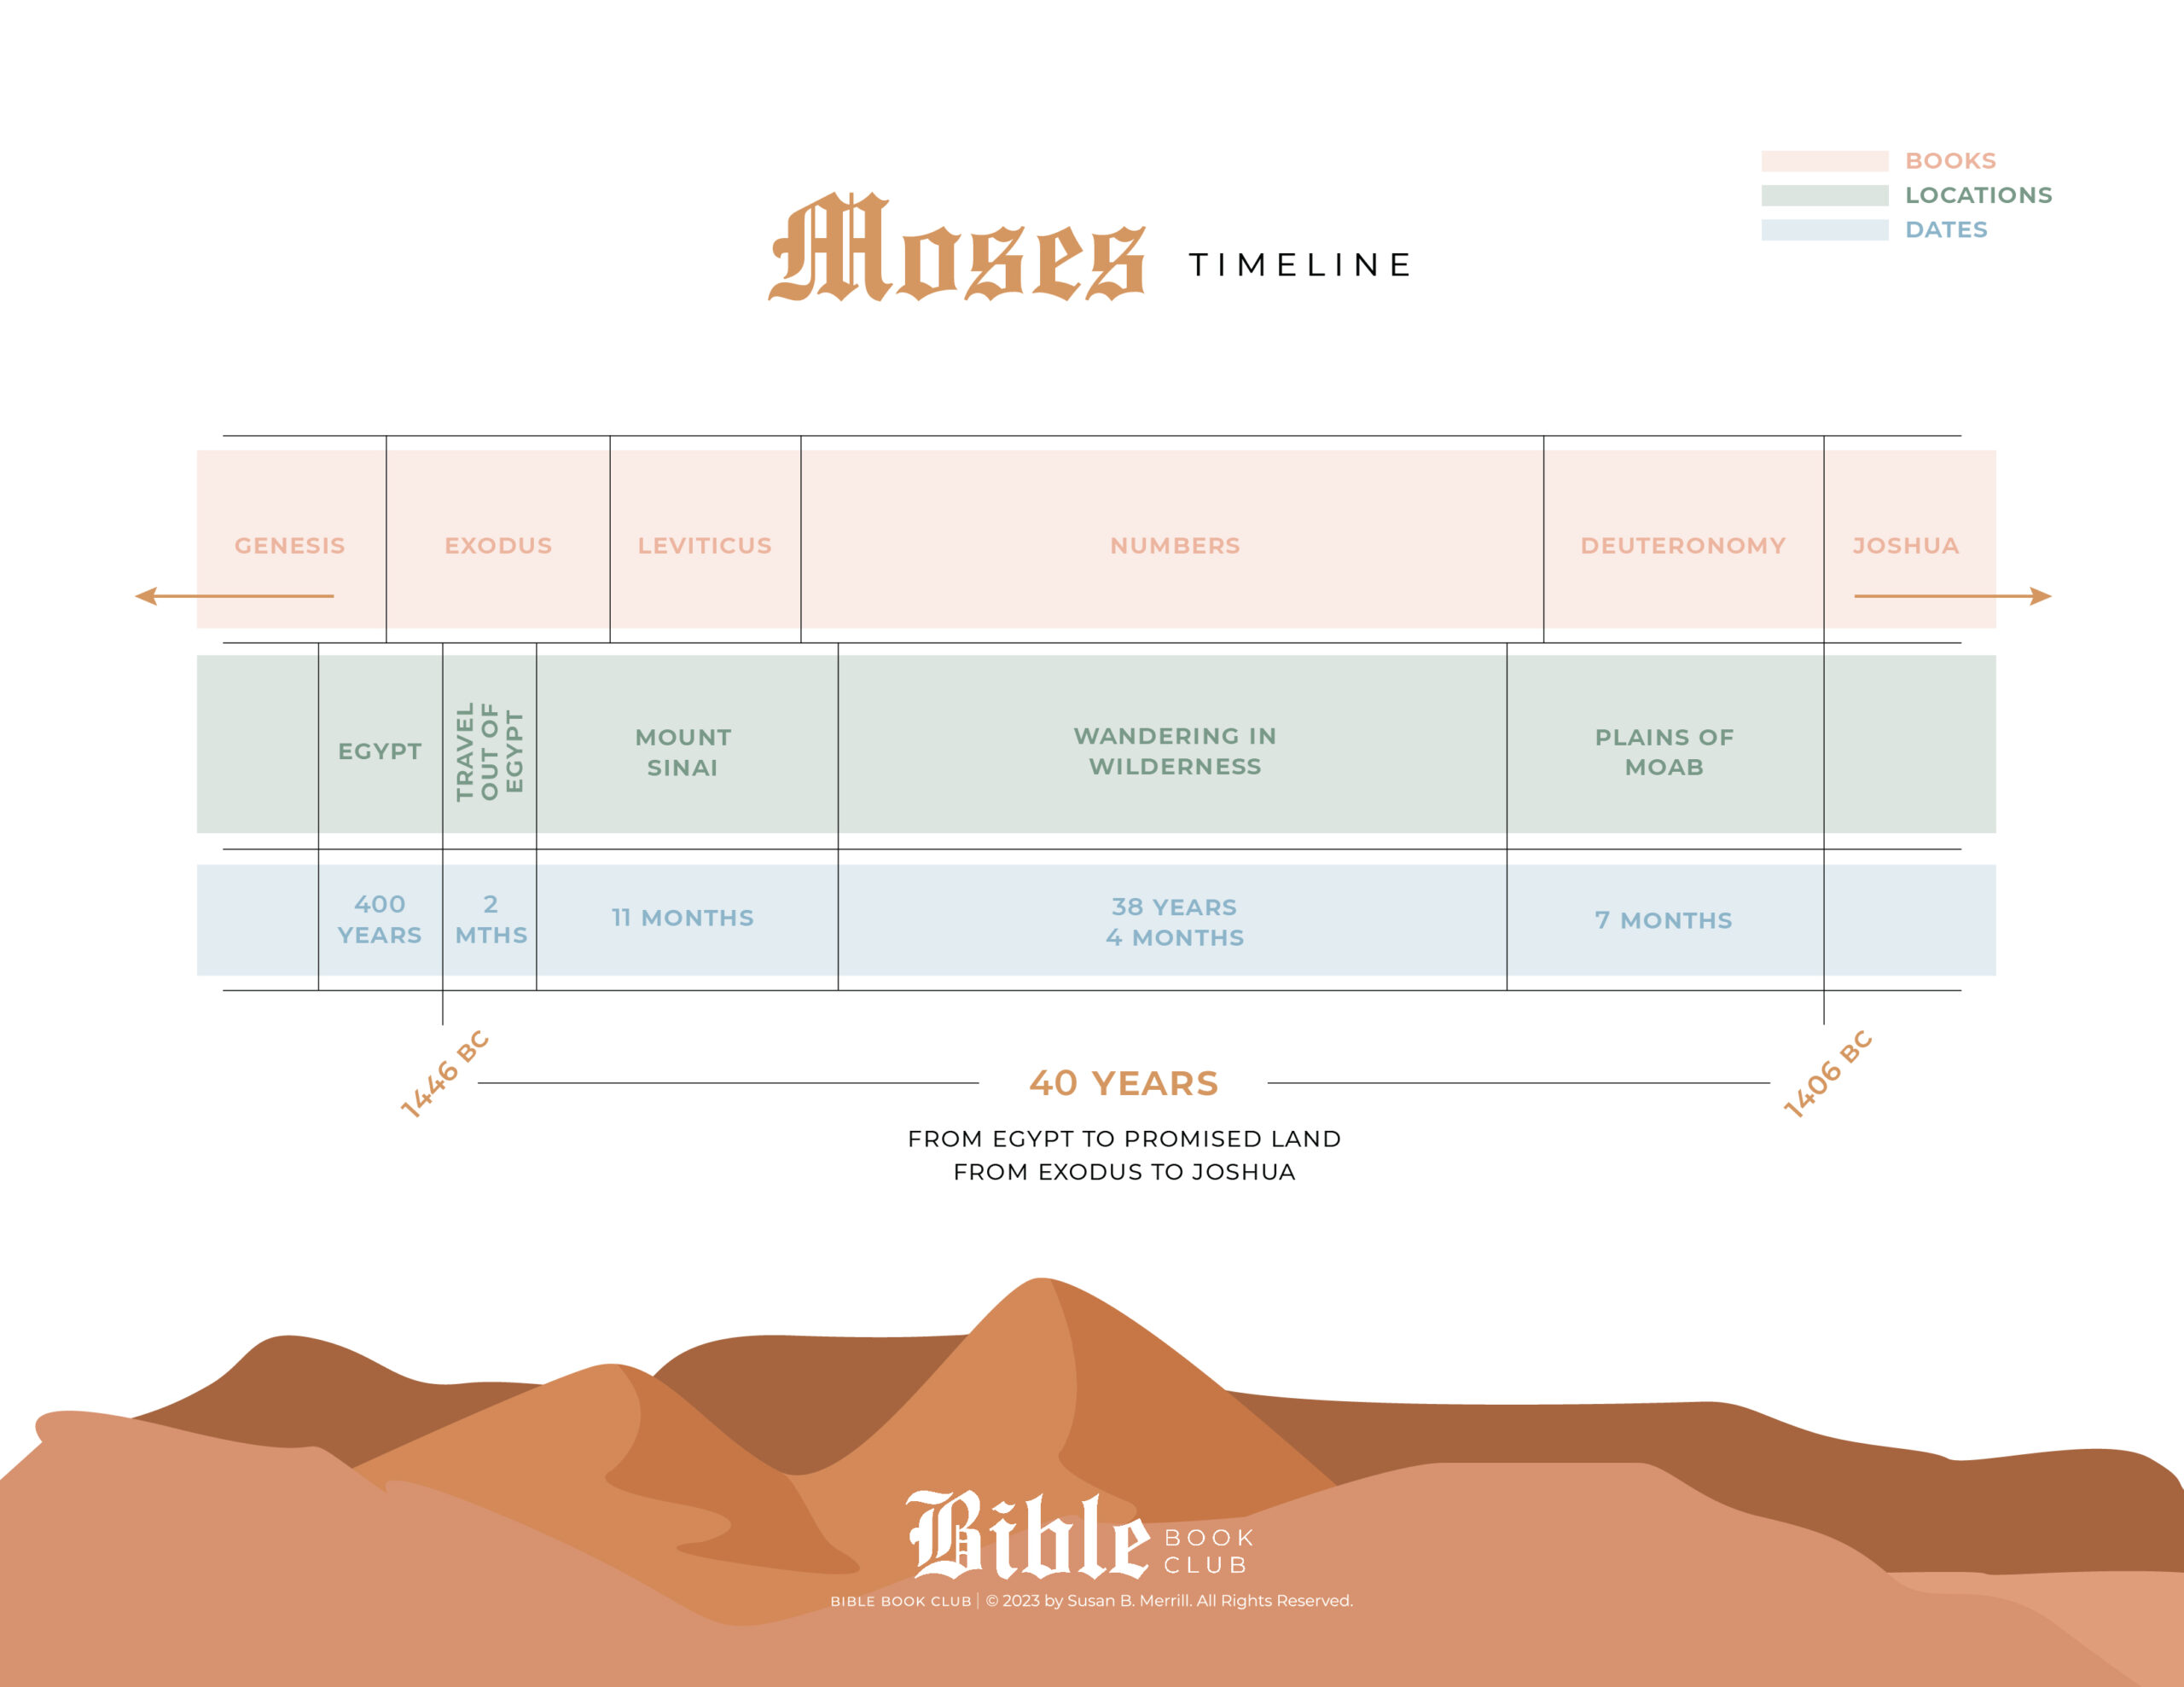 bbc moses timeline